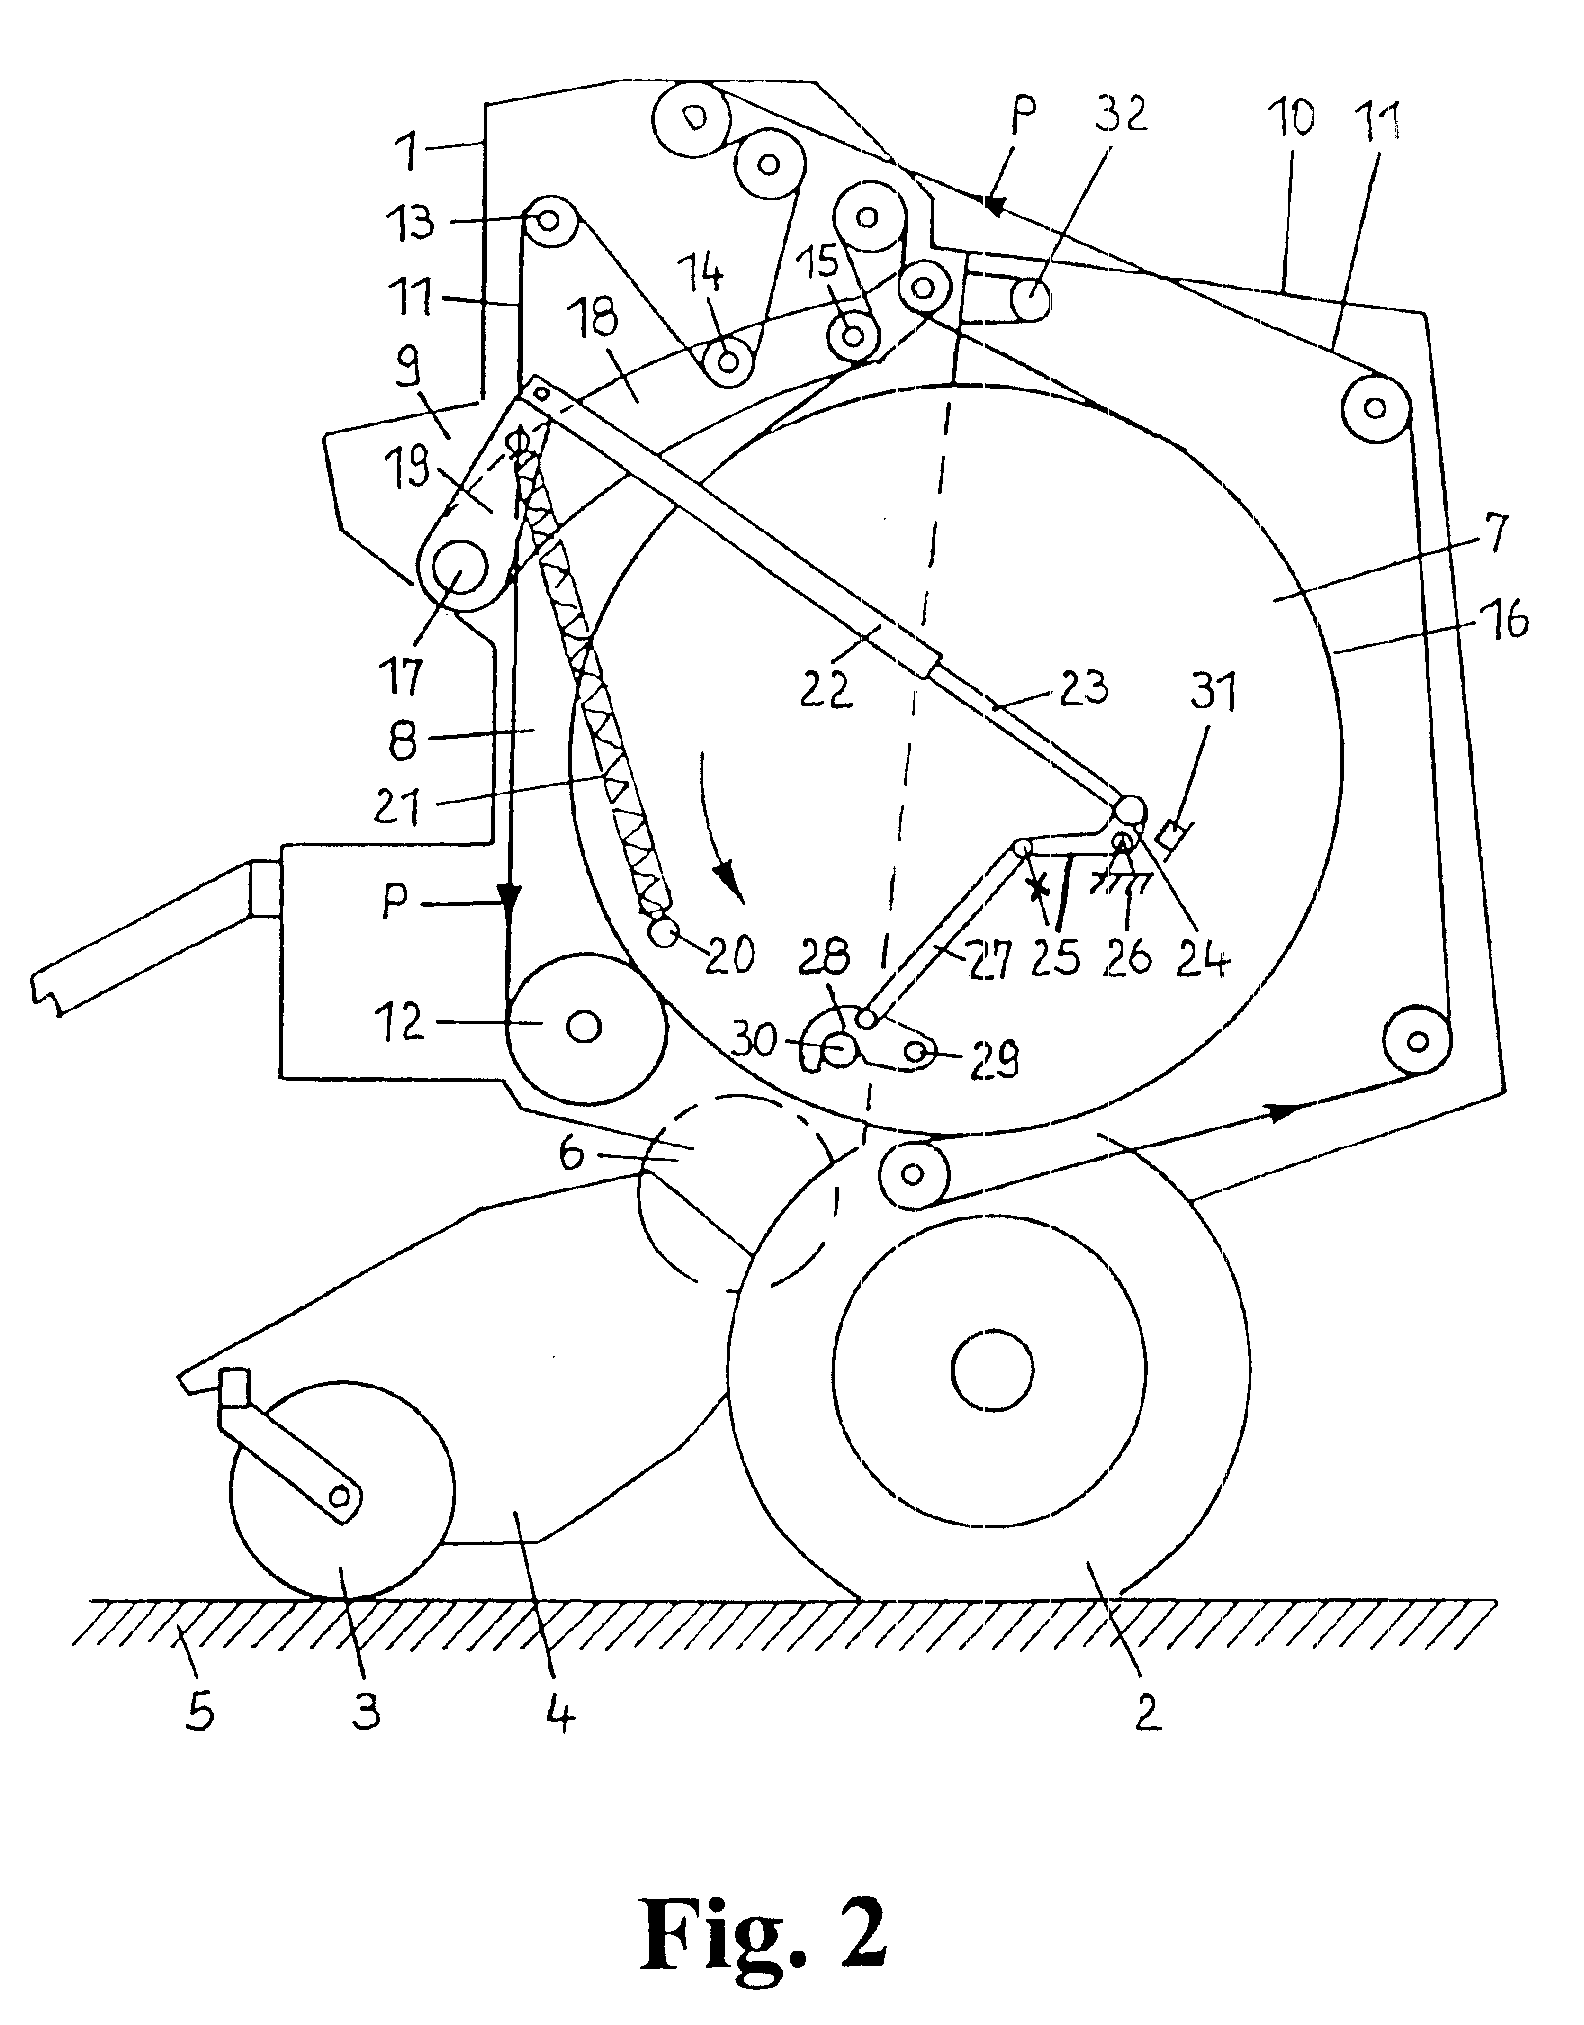 Actuating mechanism for the functional elements in a round baler